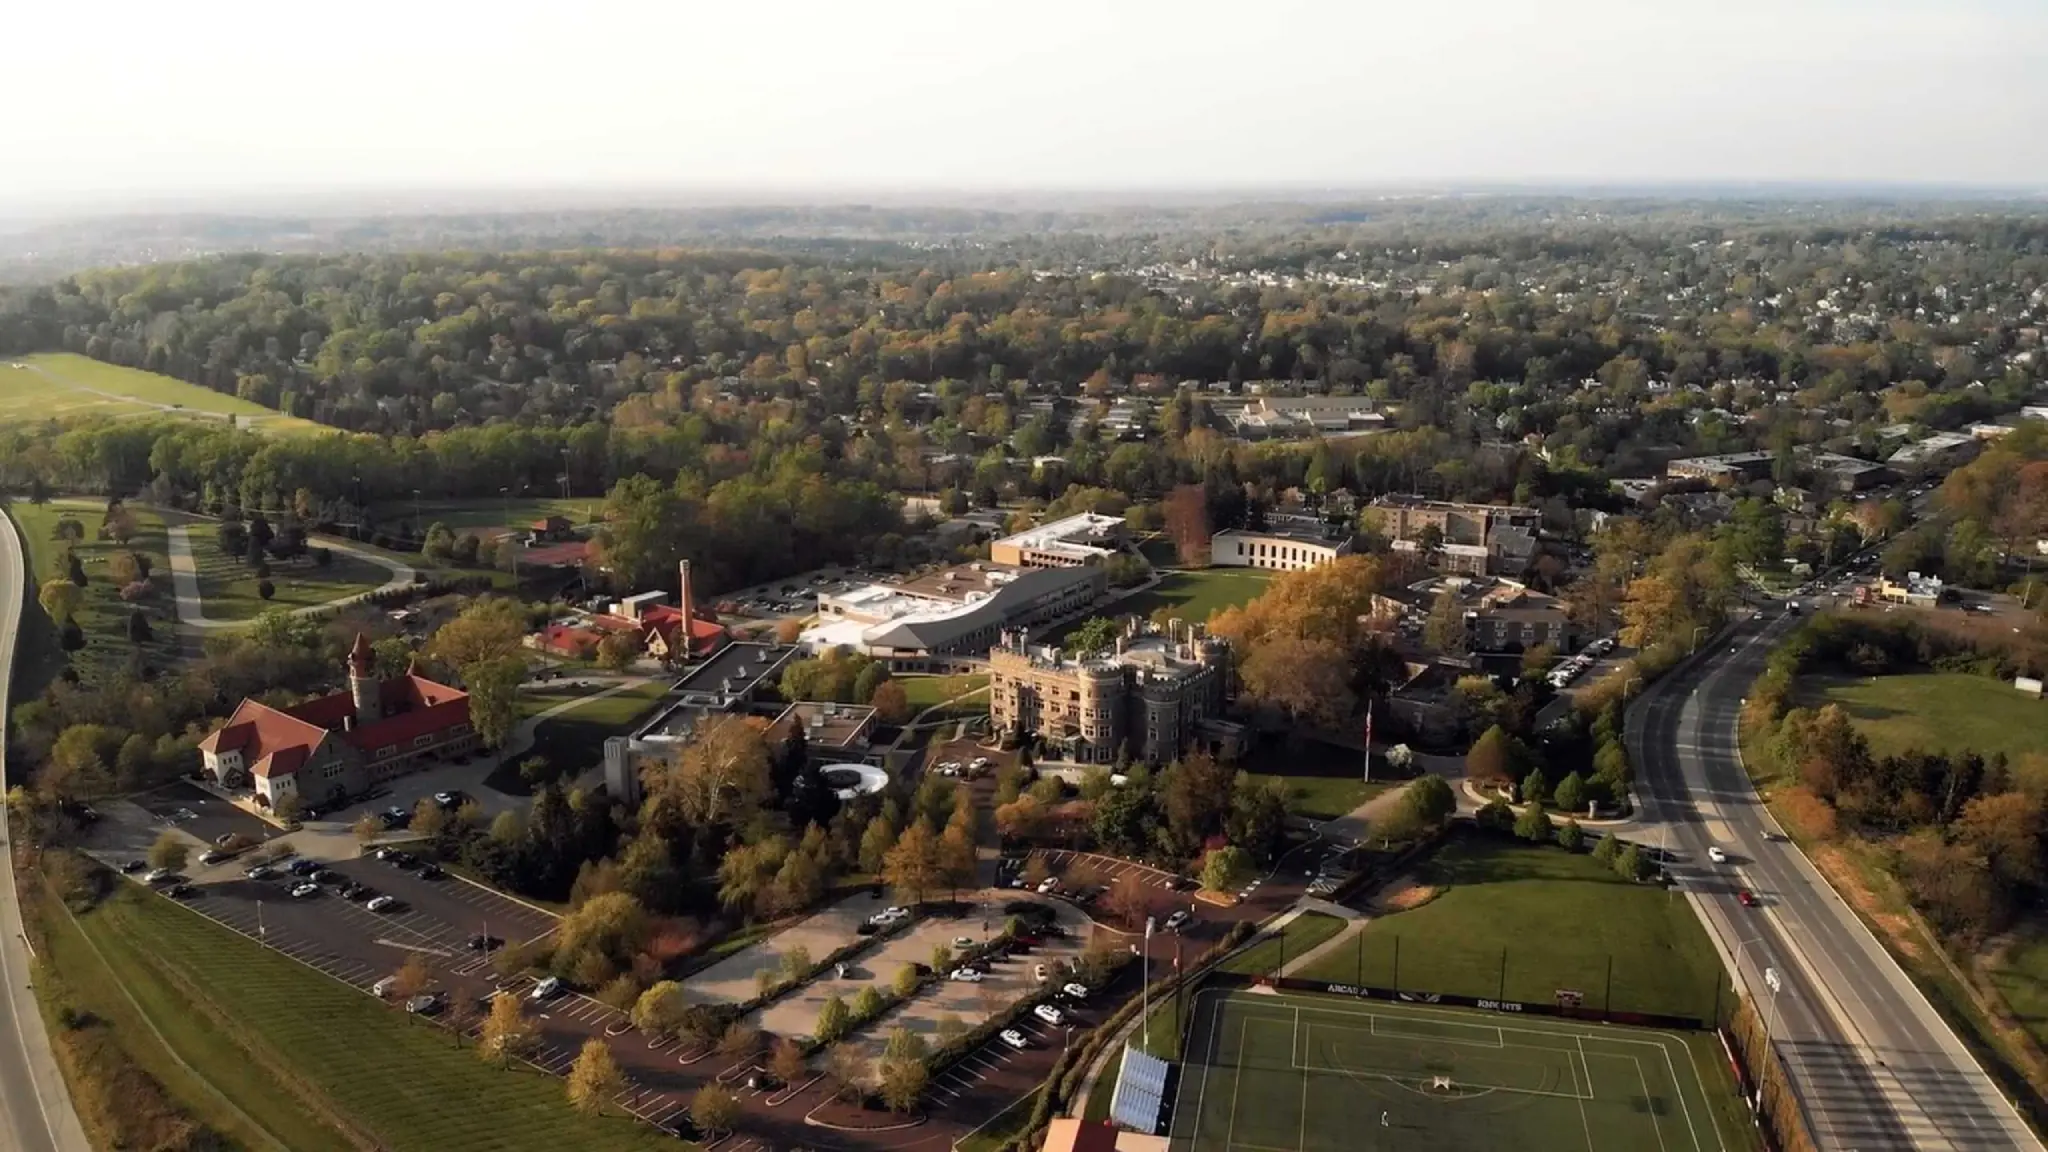 A flyover view of the Arcadia University Glenside campus